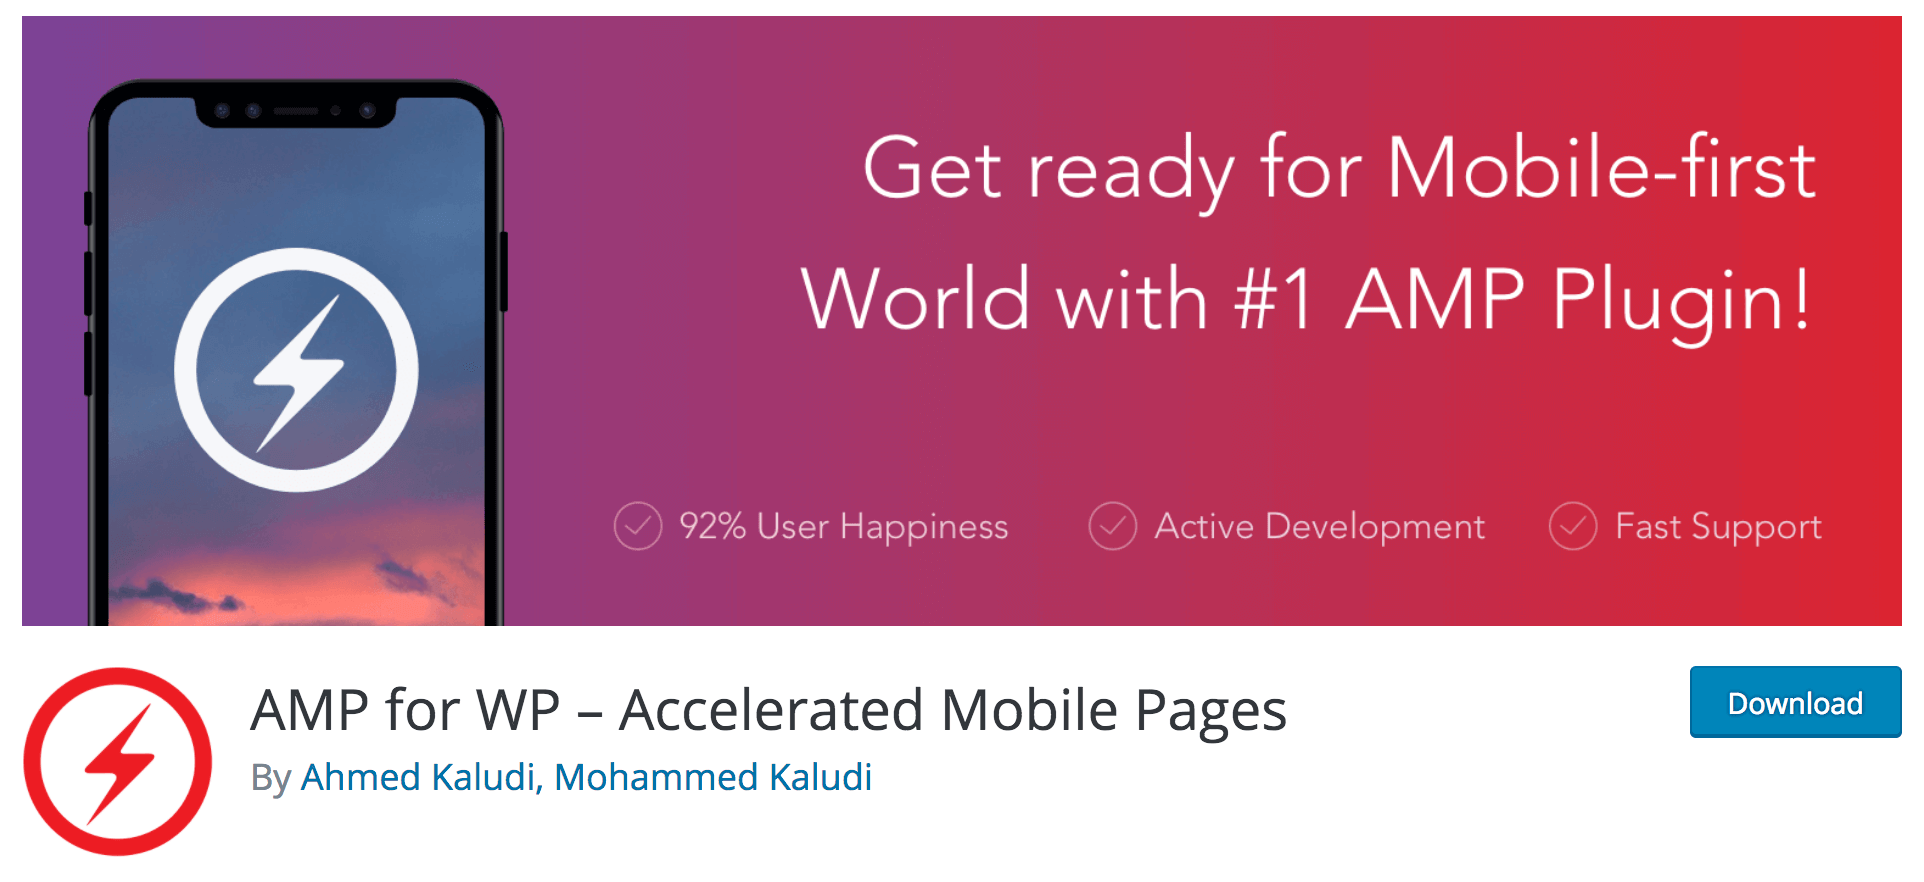 The AMP for WP plugin.